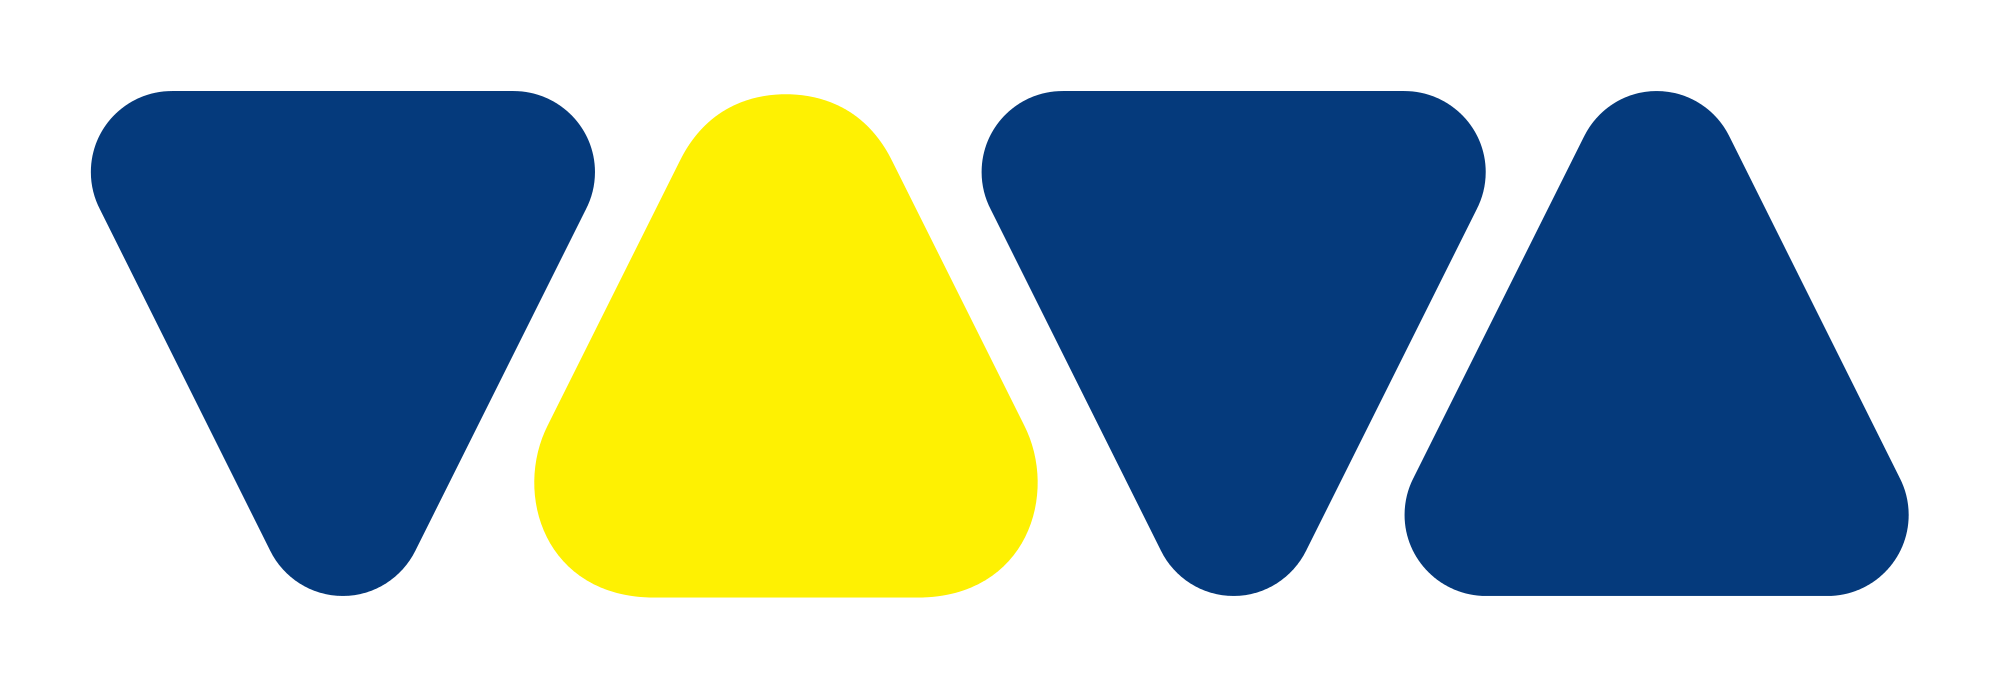 Blue and Yellow Logo - VIVA Logo Blue Yellow Solid.svg